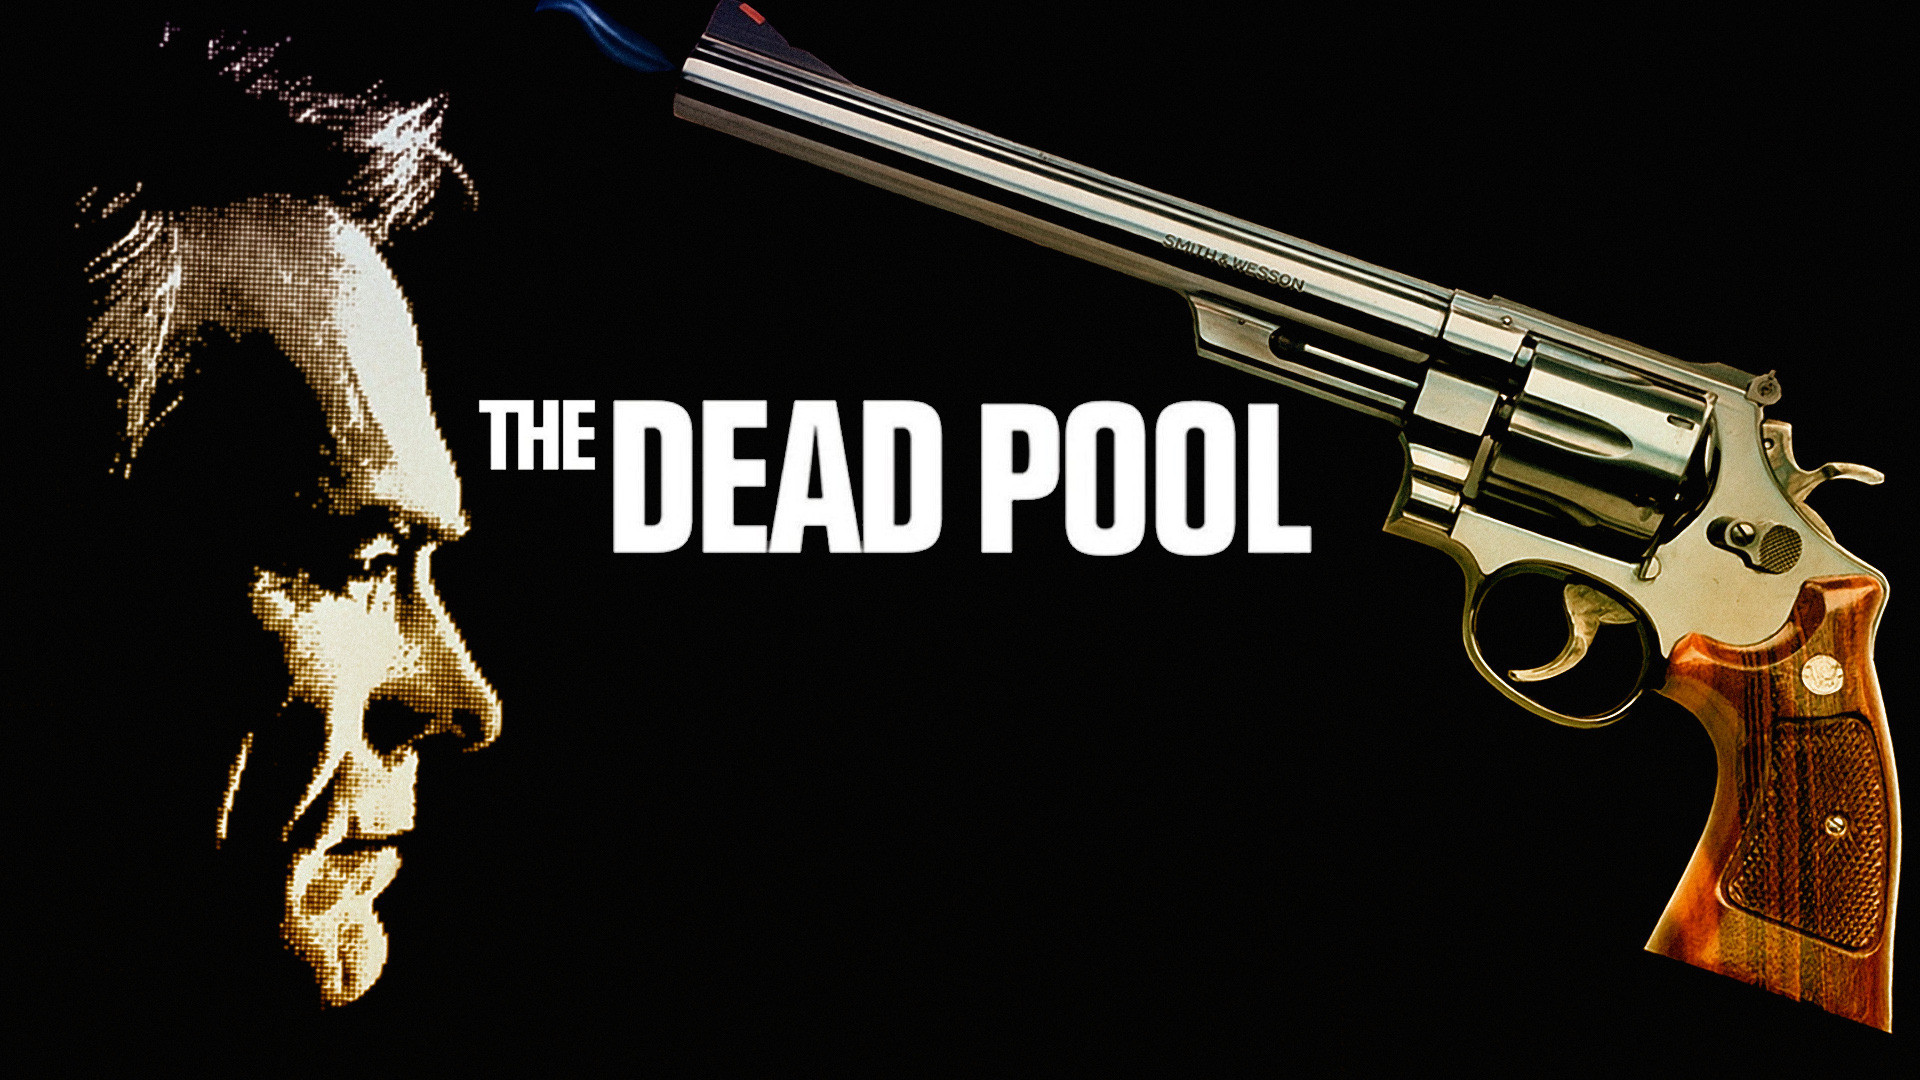 The Dead Pool HD Wallpaper | Background Image | 1920x1080 | ID:476514